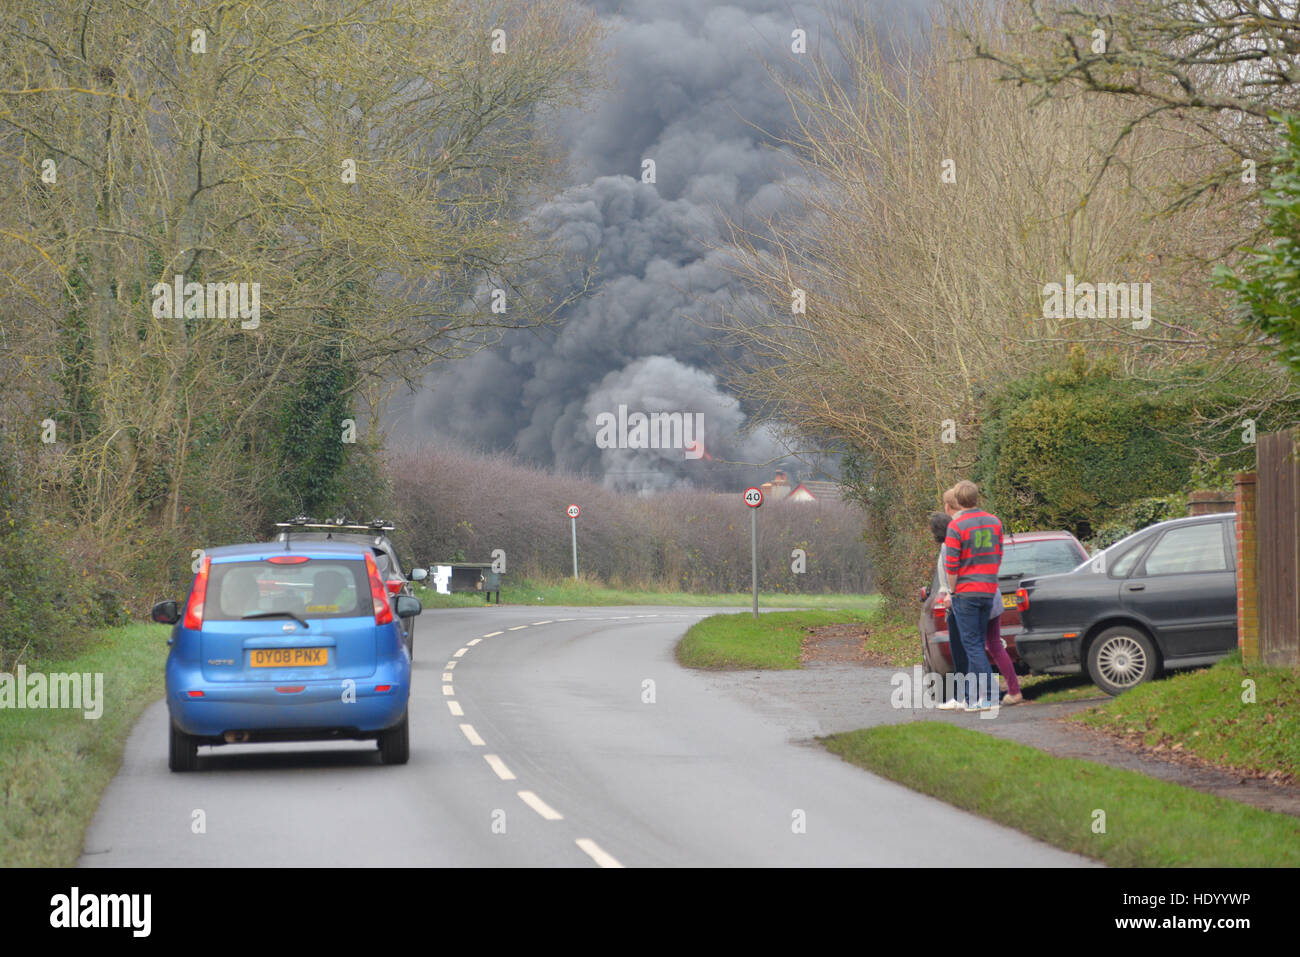 Fordingbridge, Hampshire, UK. 15th December, 2016. Garage fire with plumes of thick black smoke. The fire brigade are in attendance. Stock Photo